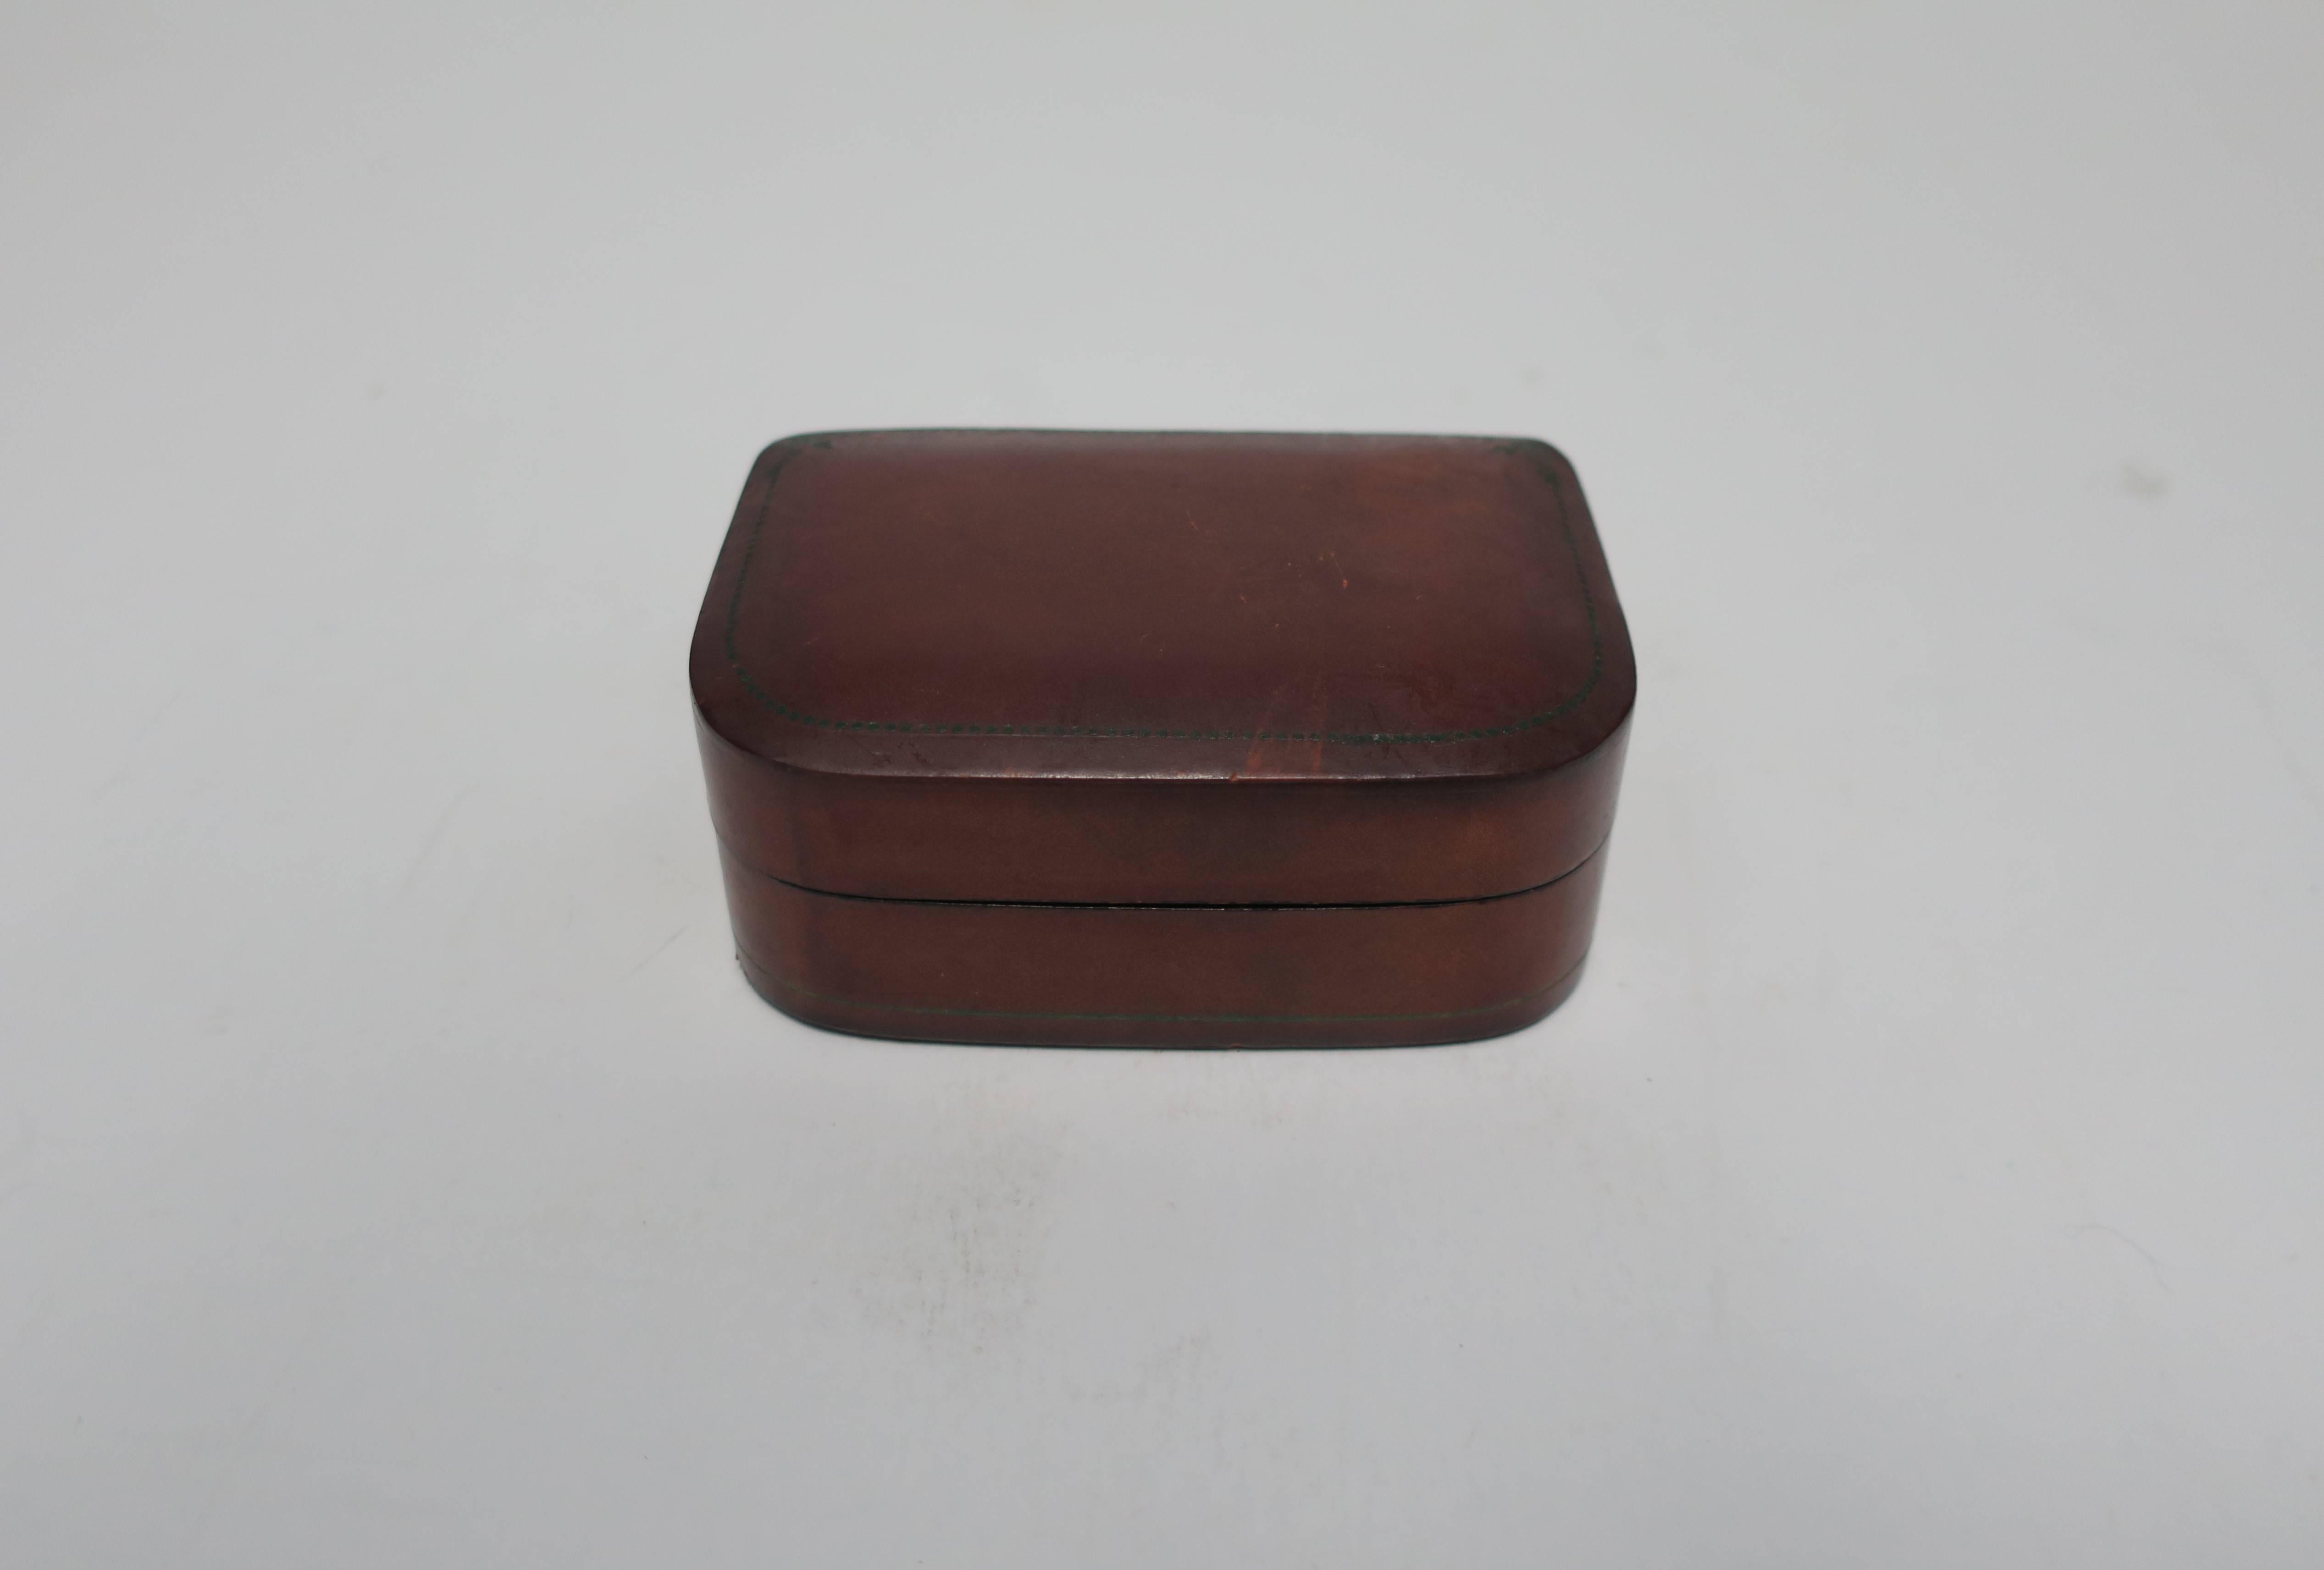 A small vintage Italian brown leather jewelry box with cotton velvet lining. Marked 